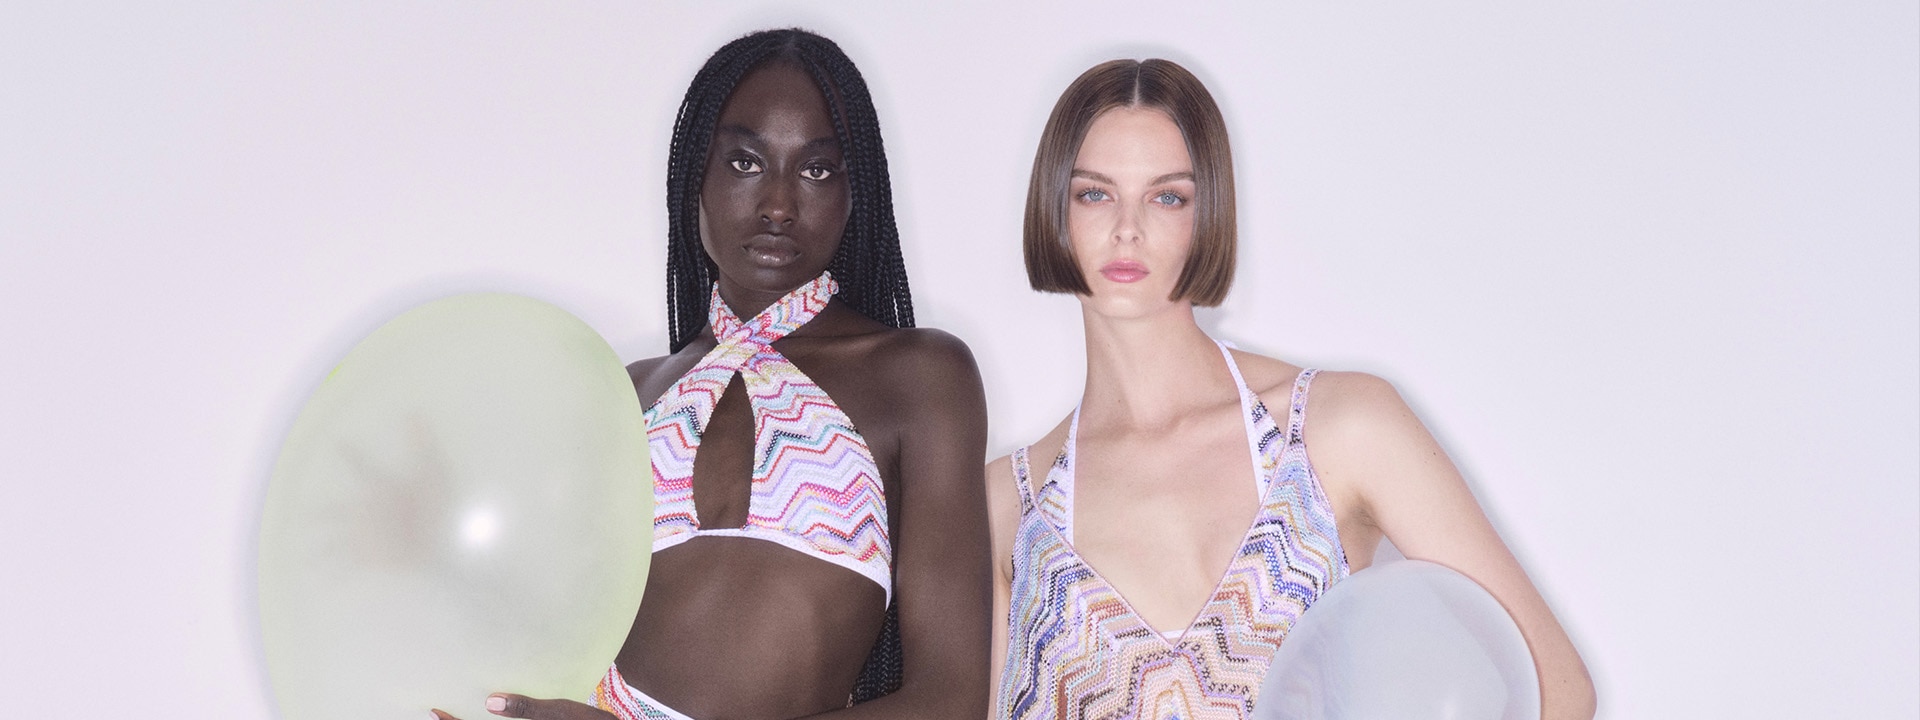 Two models are wearing outfits from the beachwear collection: both are in multicoloured zig zag. The model on the left is wearing a pink bikini and a long skirt, while the model on the right is wearing a dress